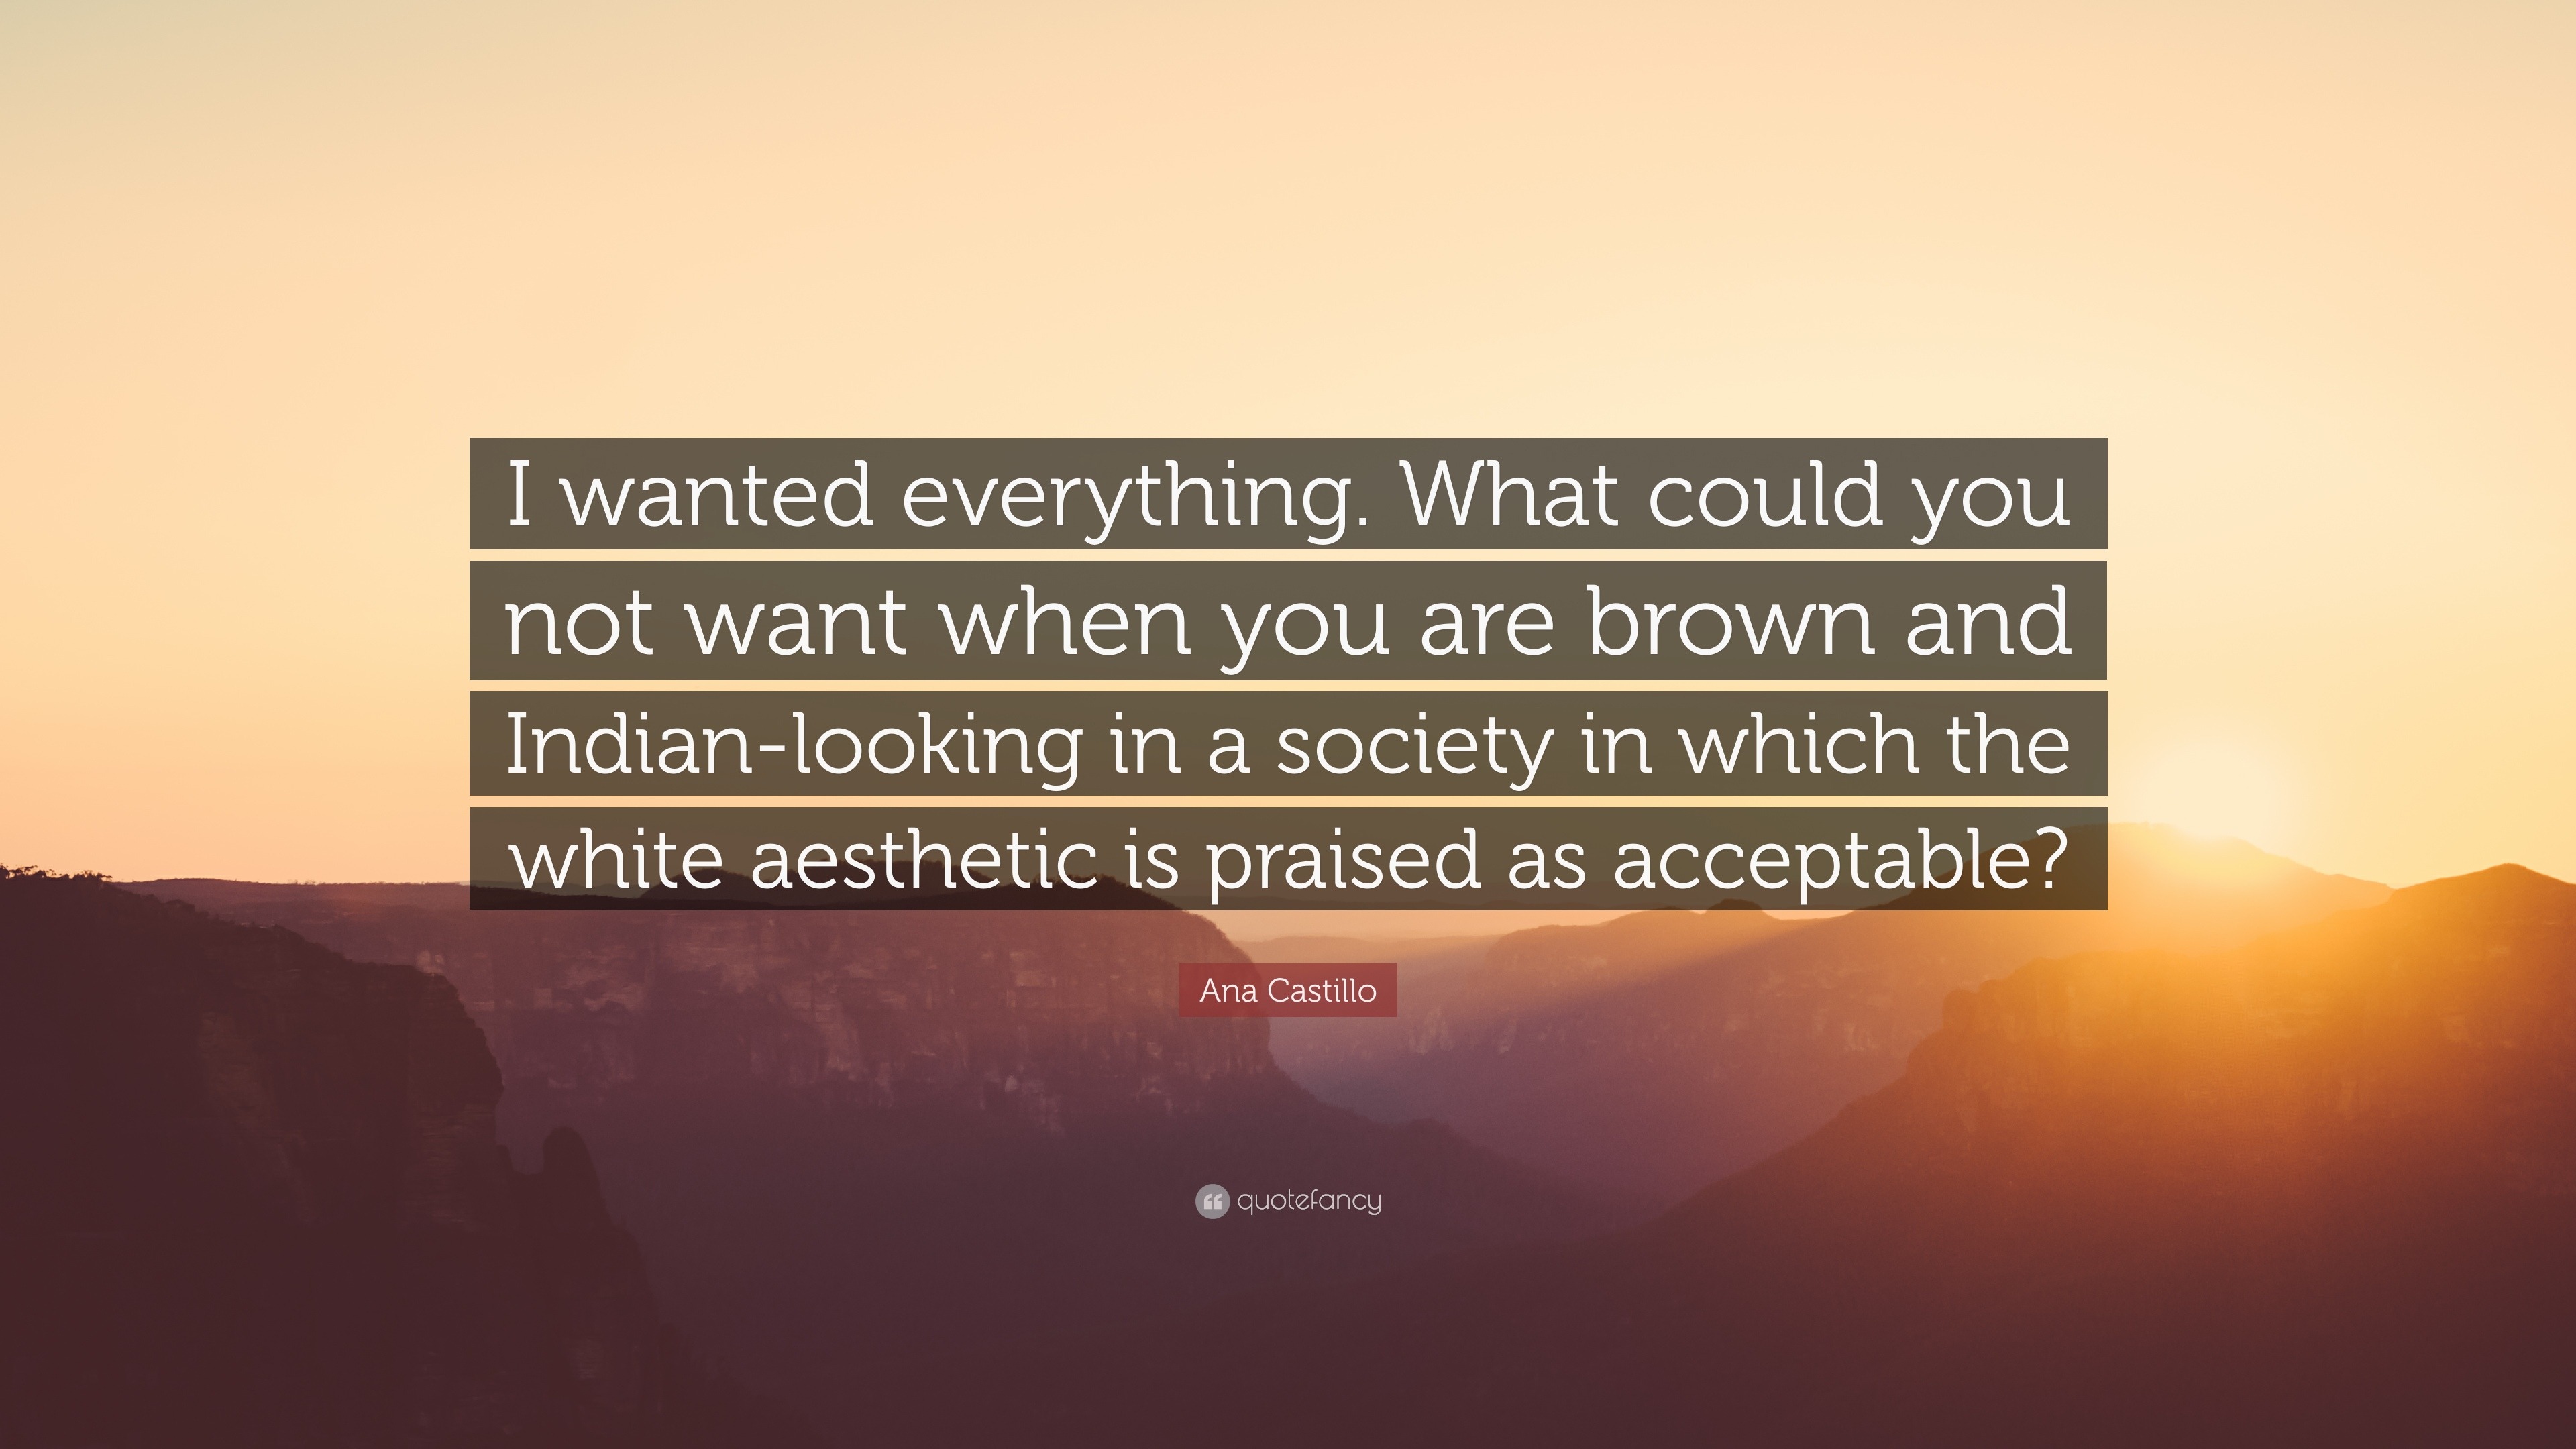 Ana Castillo Quote I Wanted Everything What Could You Not Want When You Are Brown And Indian Looking In A Society In Which The White Aesth 7 Wallpapers Quotefancy